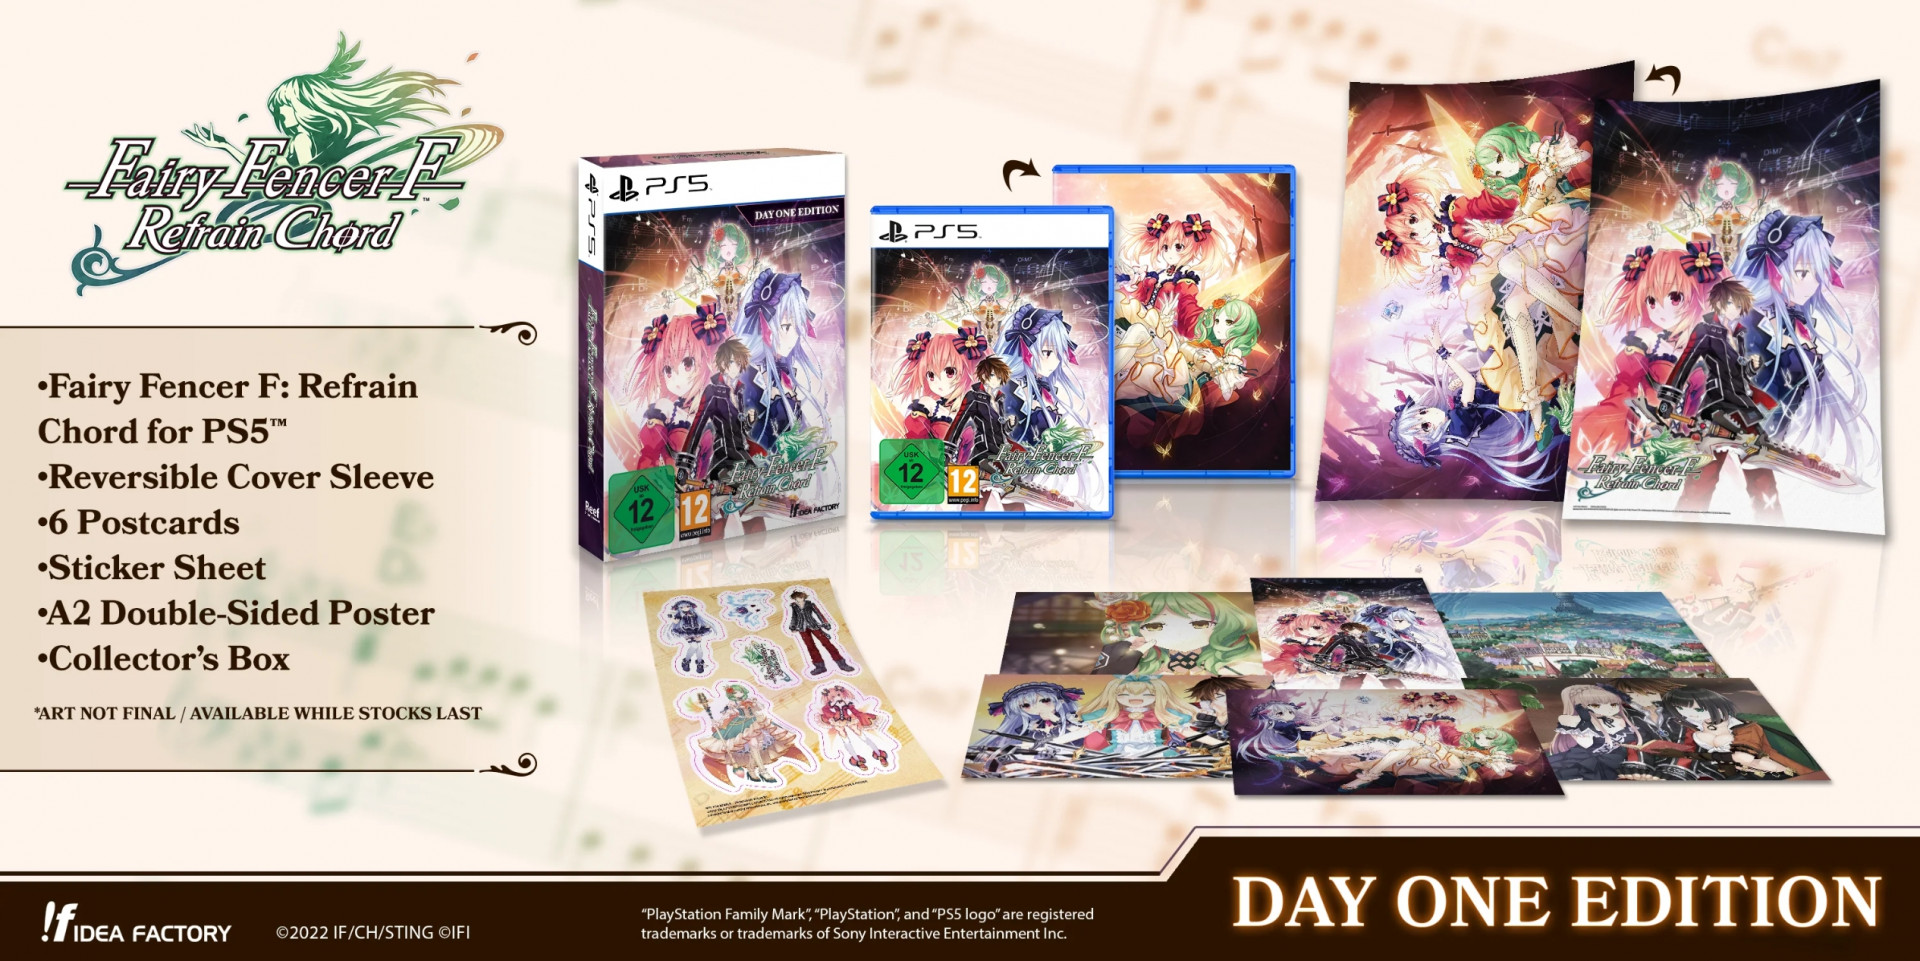 Fairy Fencer F: Refrain Chord - Day One Edition (PS5), Idea Factory